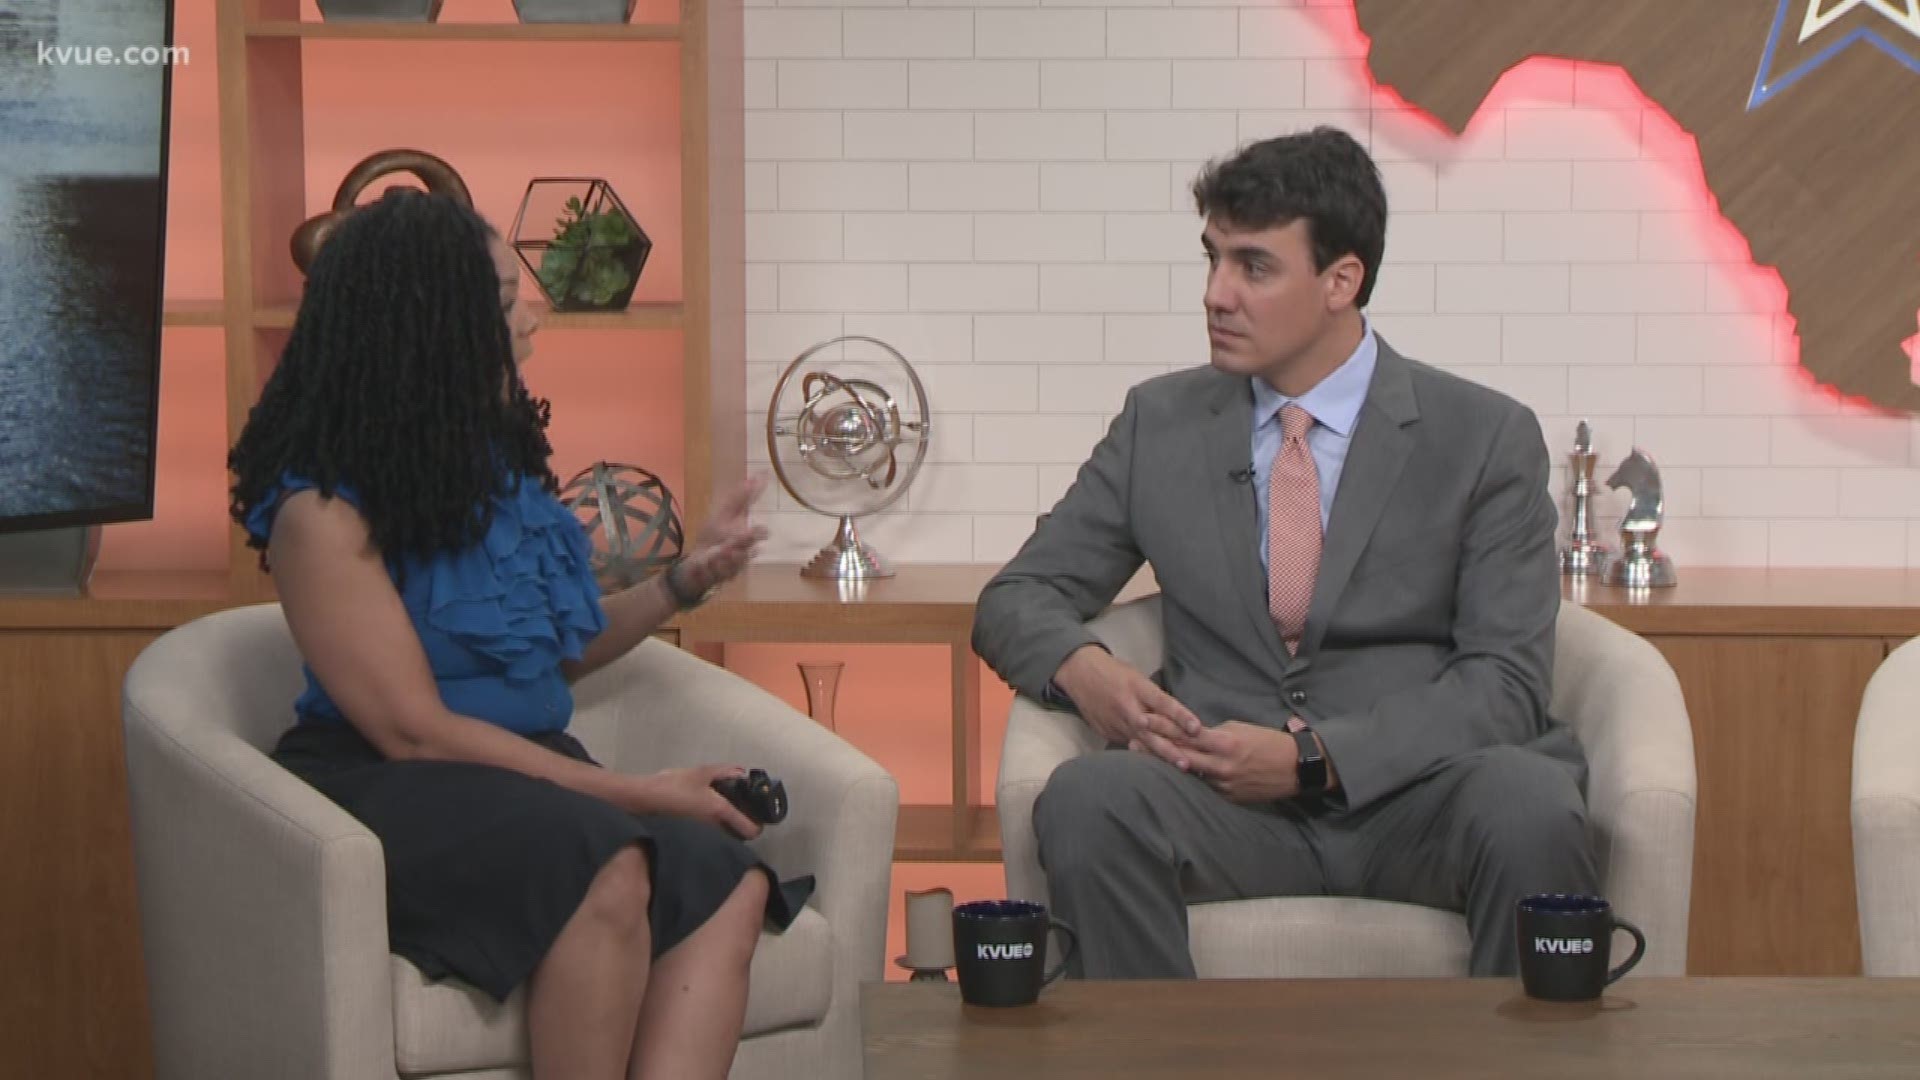 Having cancer can take a physical and emotional toll on patients and their loved ones. But some have found creative expression is a good way to help them cope. Dr. Andrew Shaw, who is the medical oncologist at Texas Oncology, stopped by KVUE to discuss this.